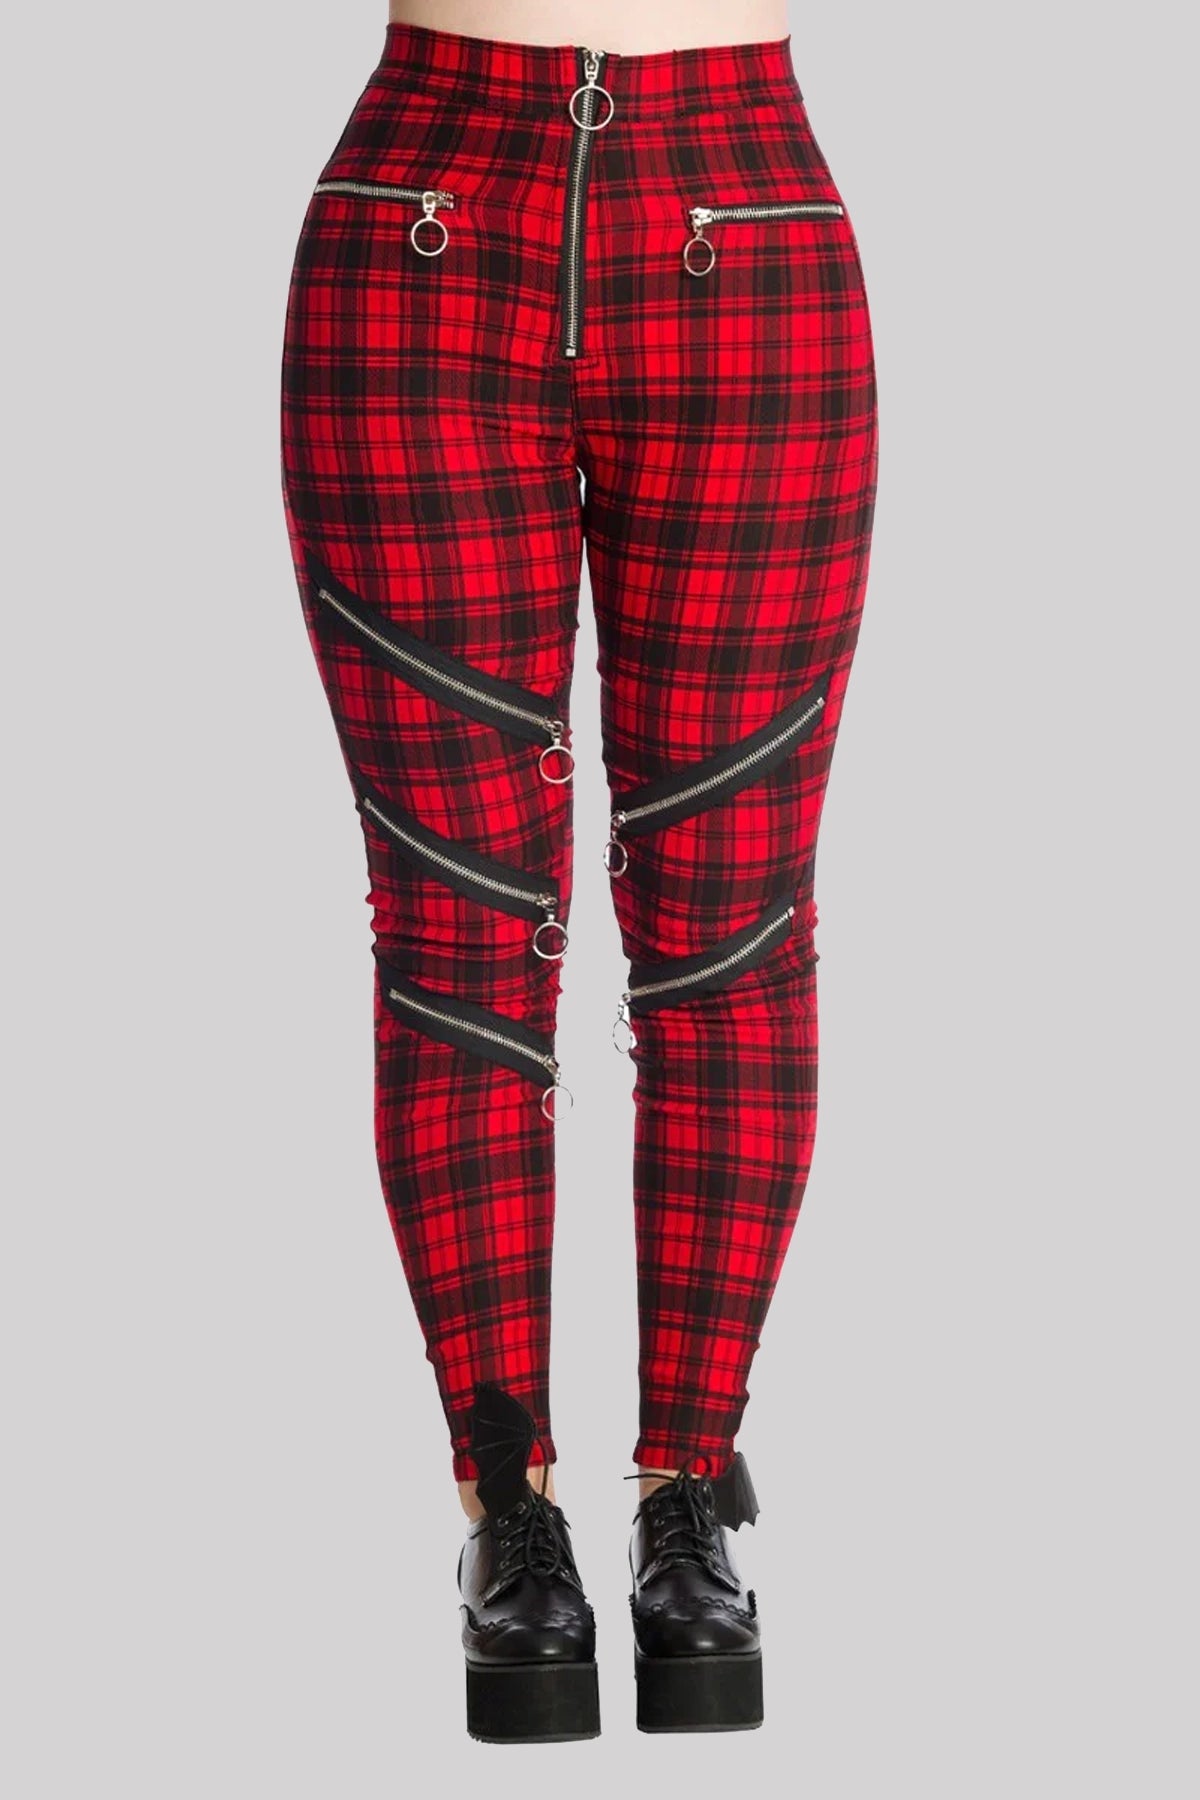 Banned Enchanted Red Tartan Punk Skinny Trousers